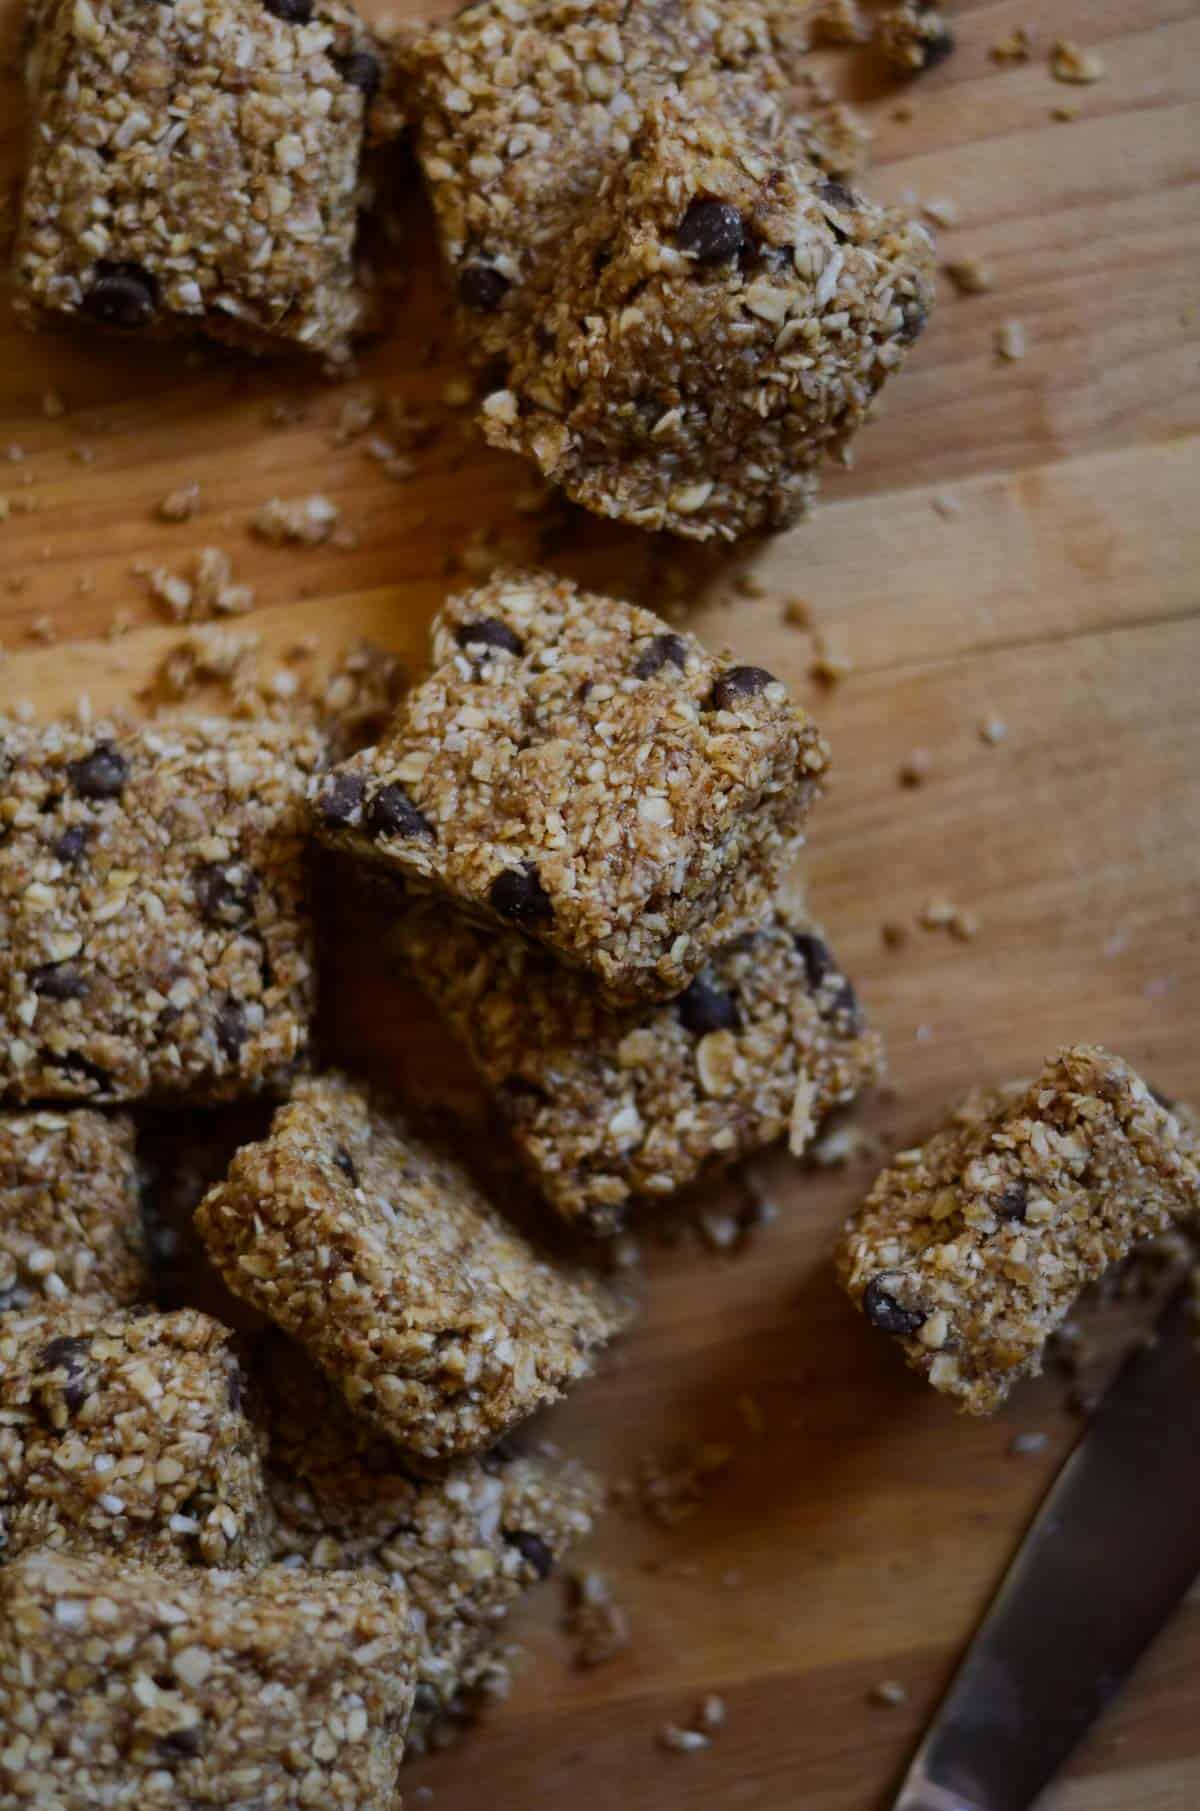 Little oatmeal chunks with chocolate chips scattered on a wooden cutting board.